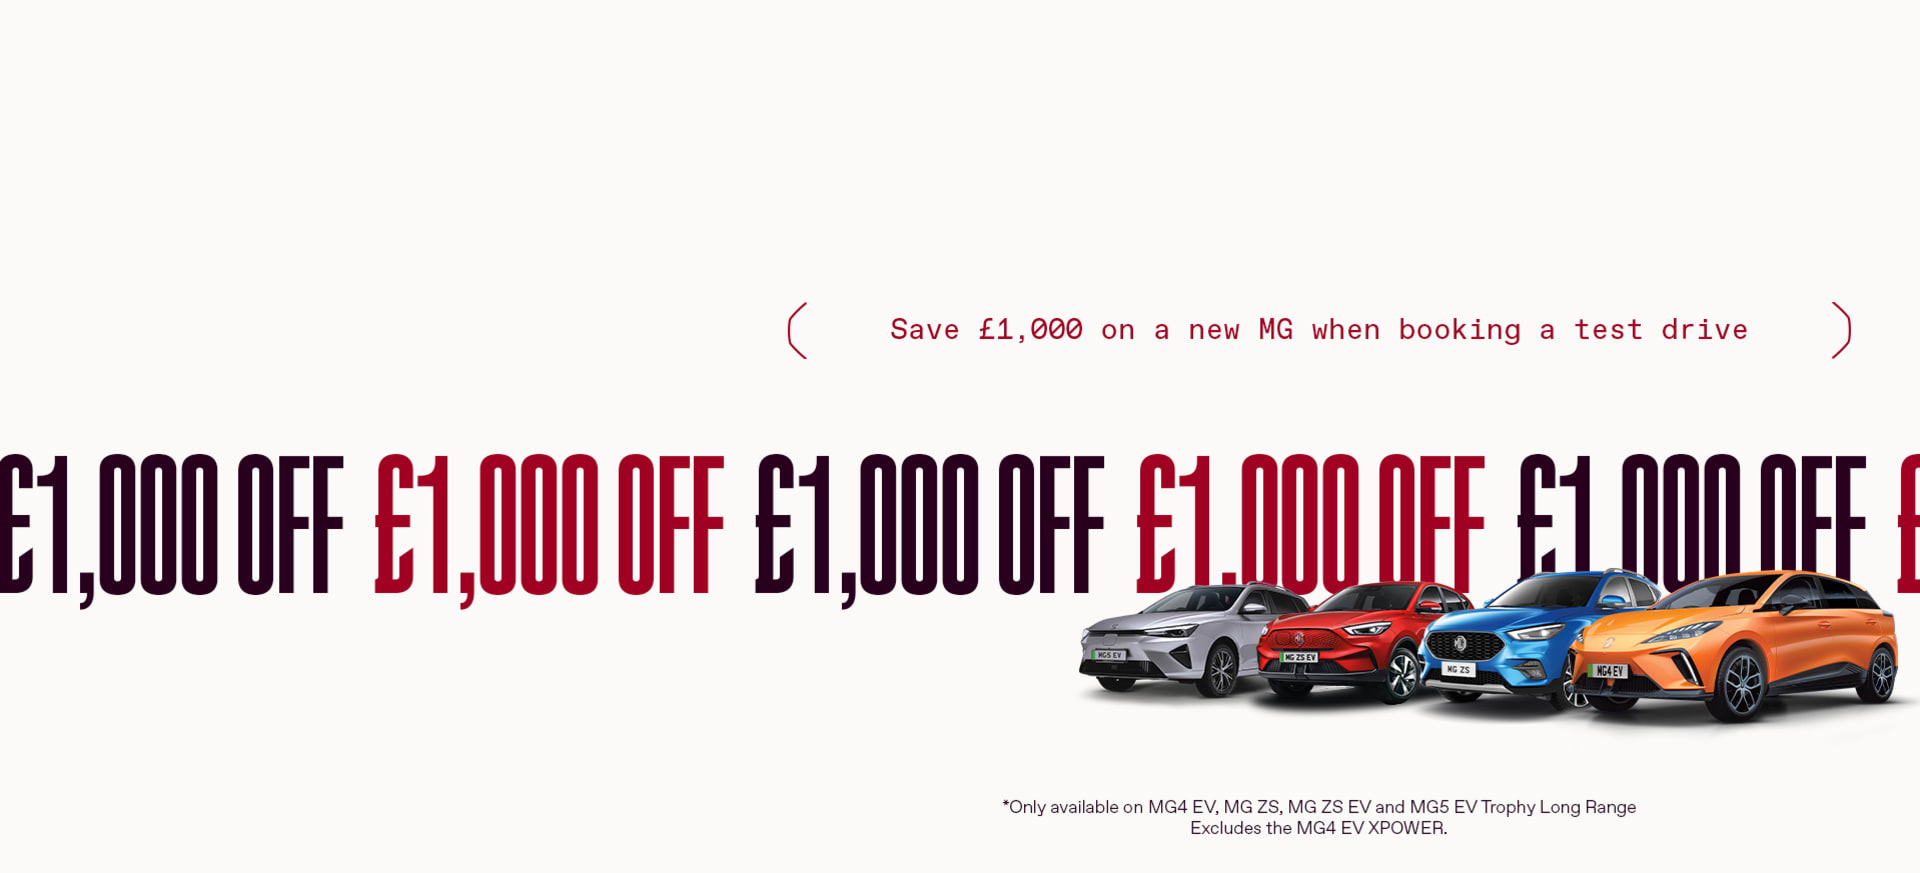 Get £1,000 off when you test drive a new MG*